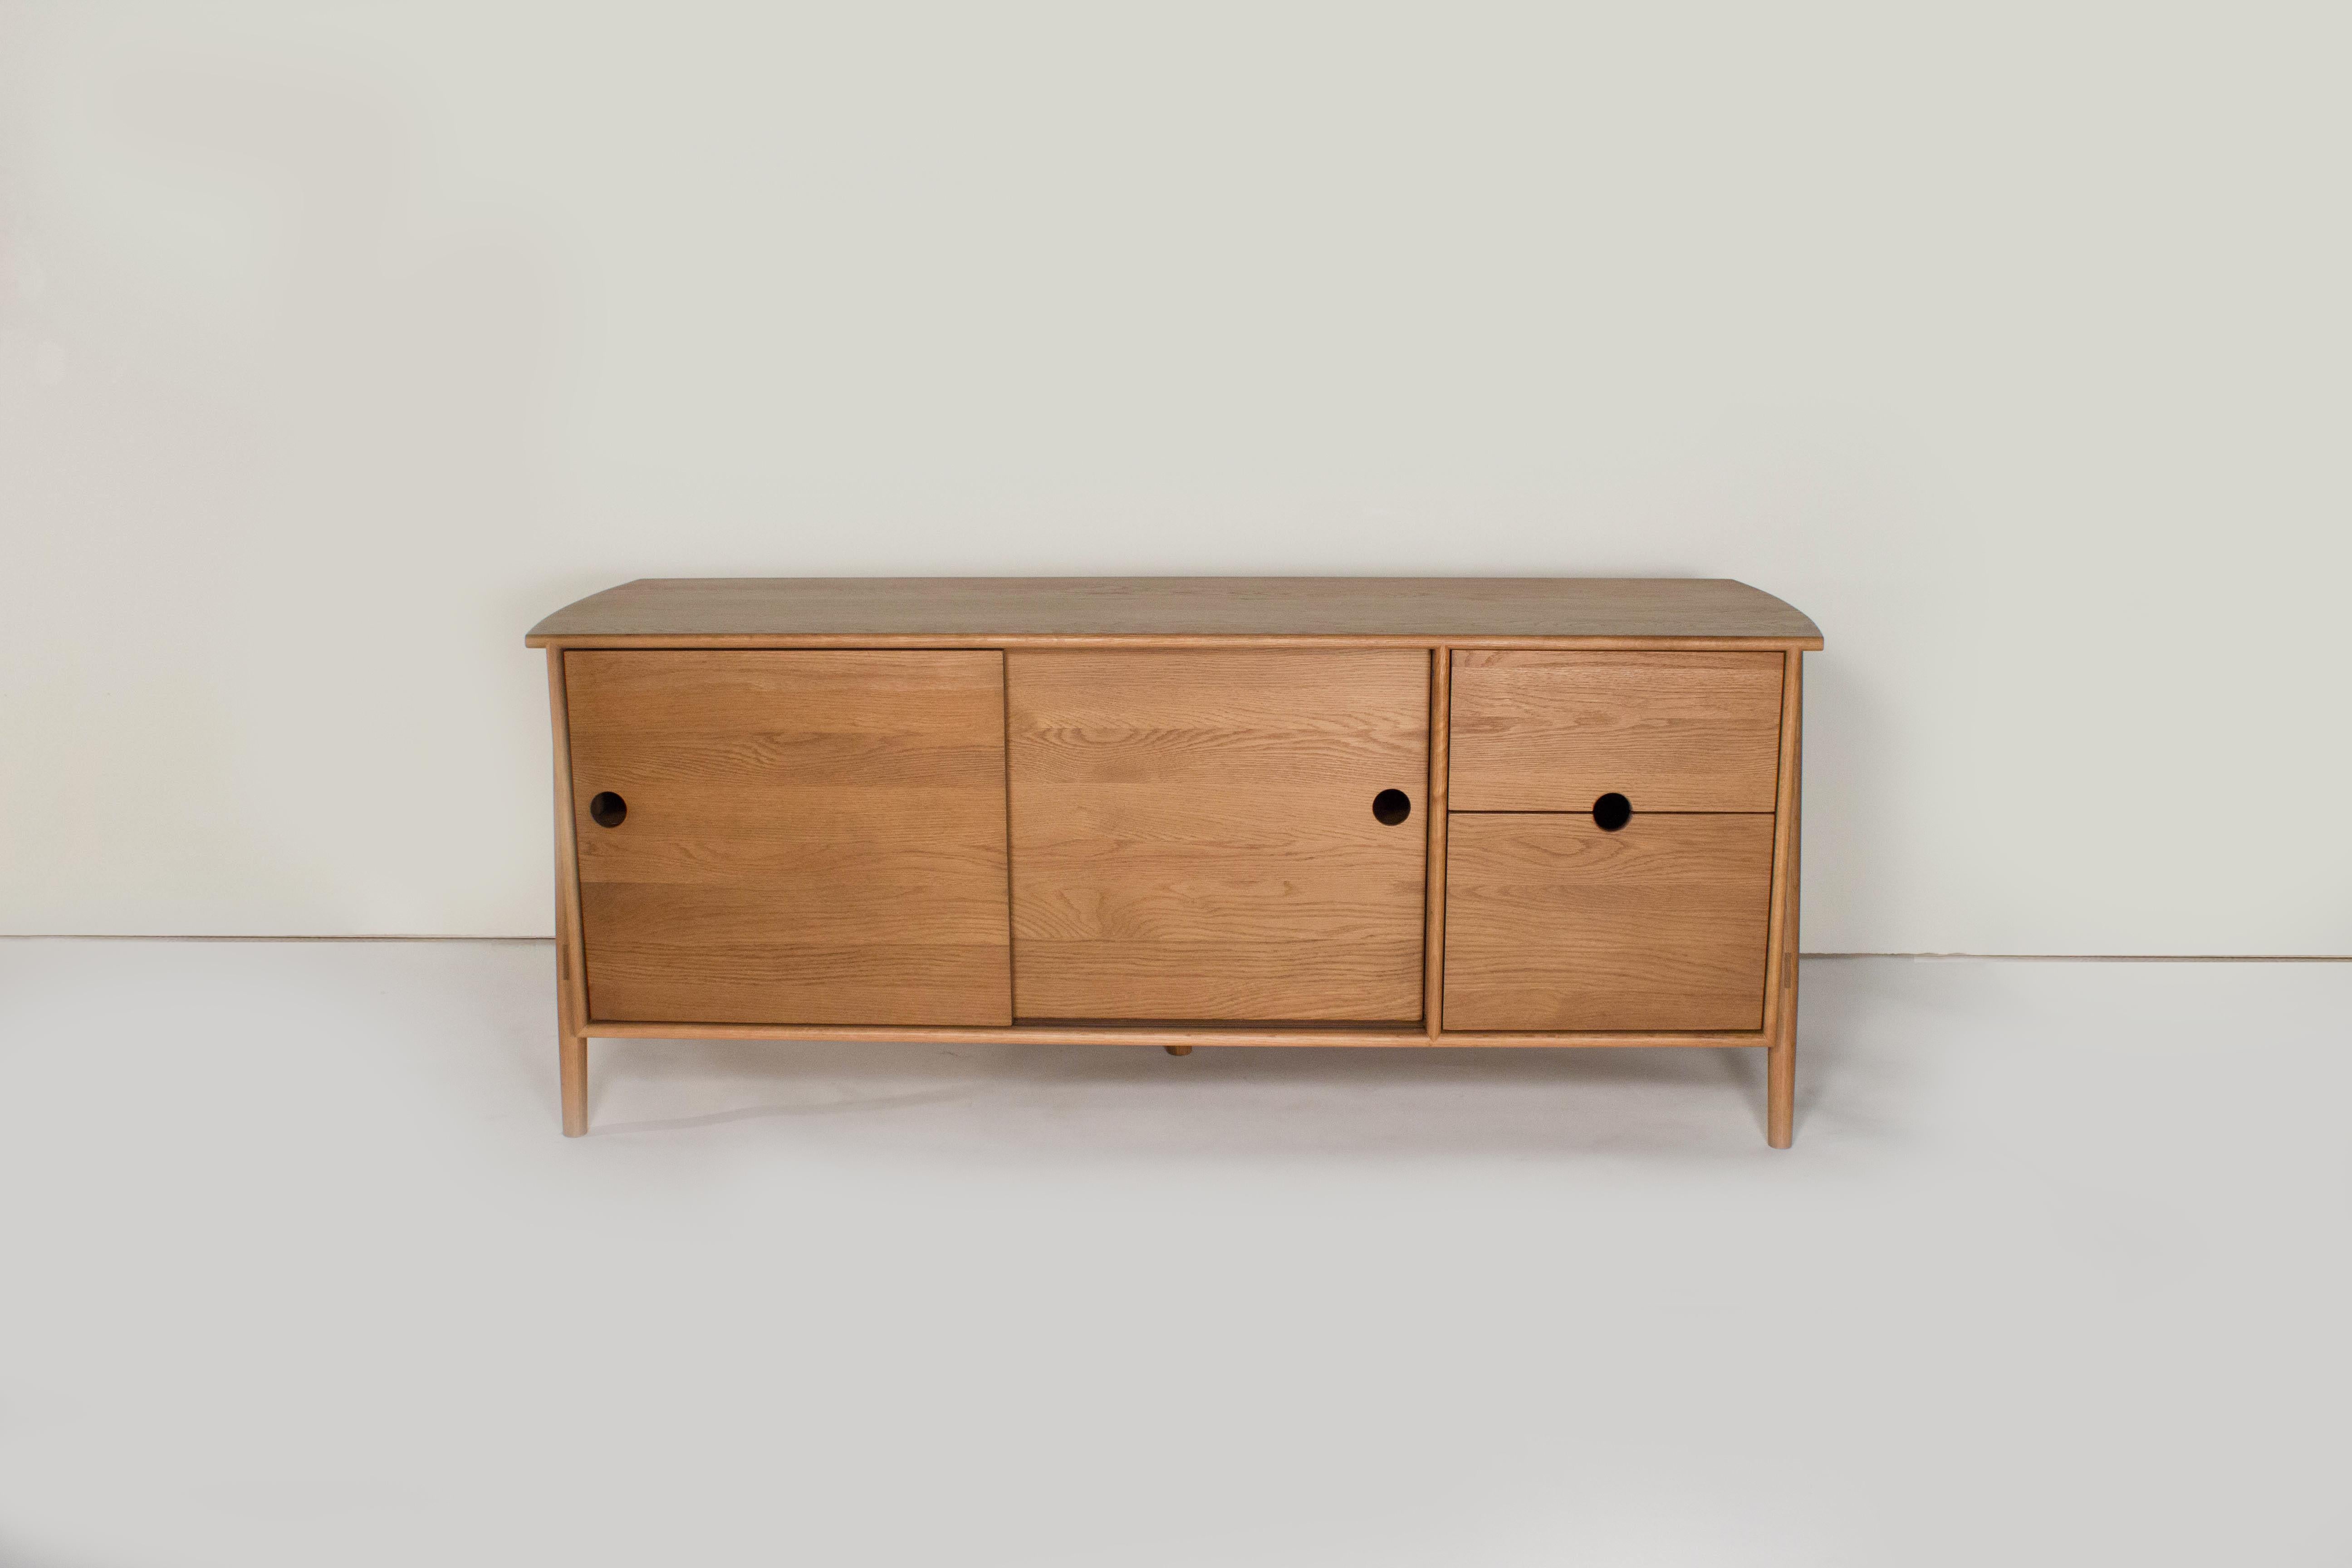 Sun at Six is a contemporary furniture design studio that works with traditional Chinese joinery masters to handcraft our pieces using traditional joinery. We work with traditional Chinese joinery masters to handcraft our pieces using traditional